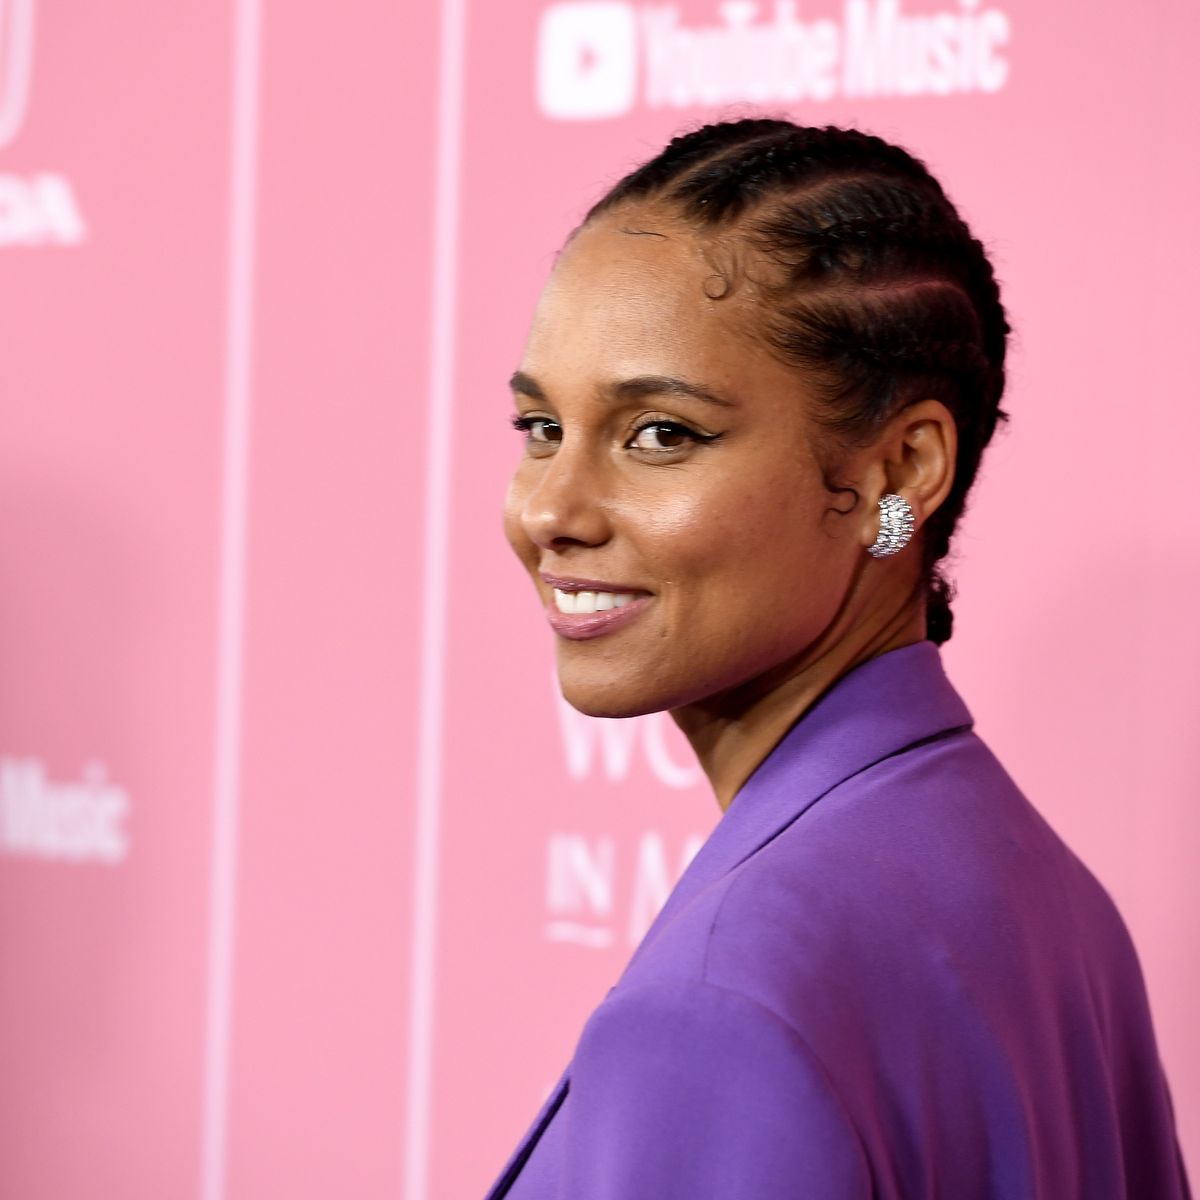 Alicia Keys Porn - Alicia Keys says music saved her from a life of prostitution